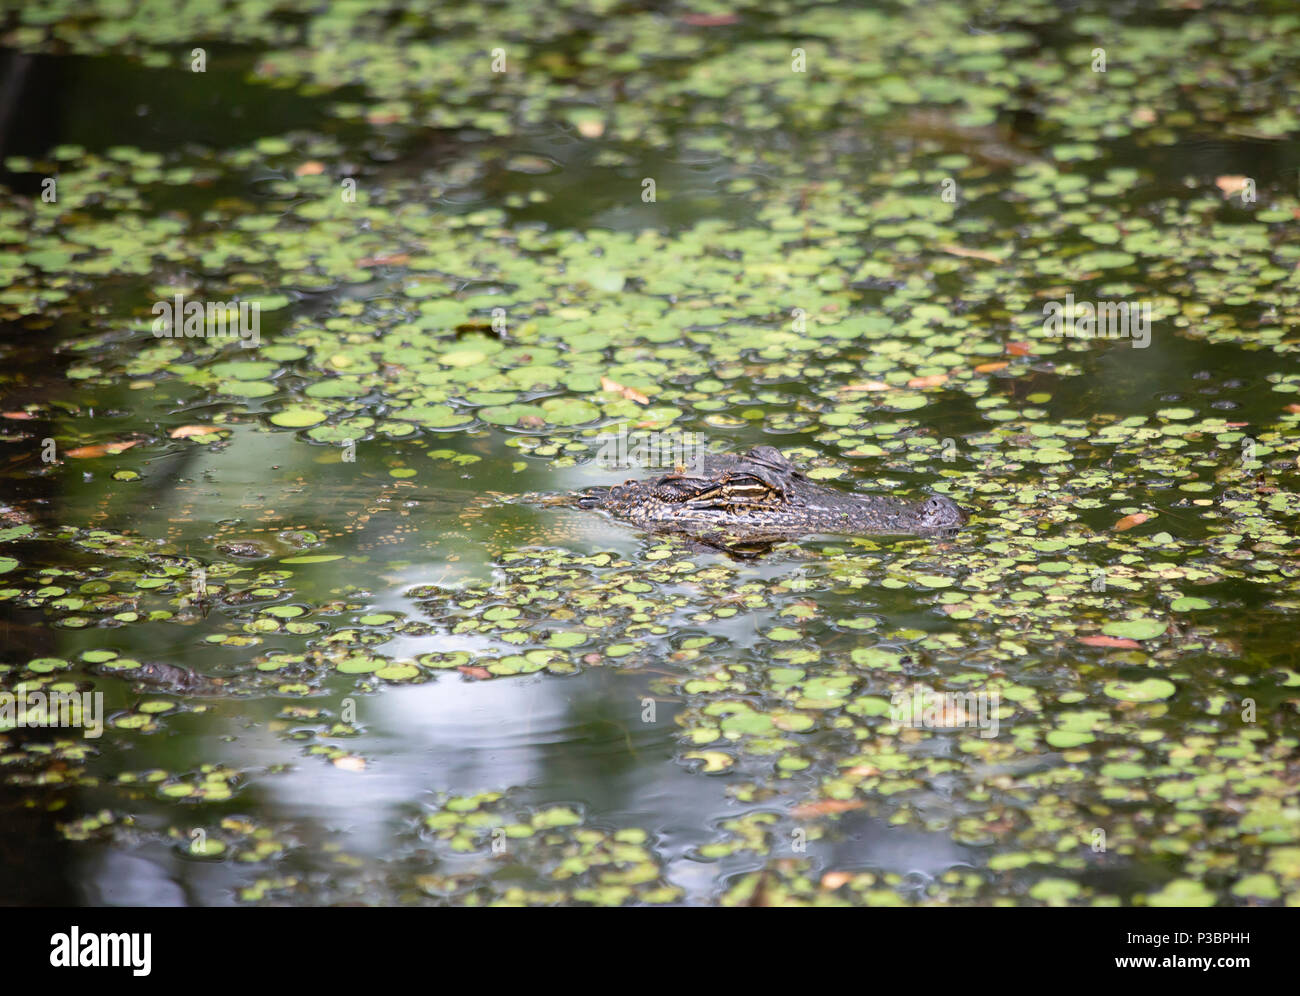 Bayou alligator (Alligator mississippiensis) with its eyes closed Stock Photo